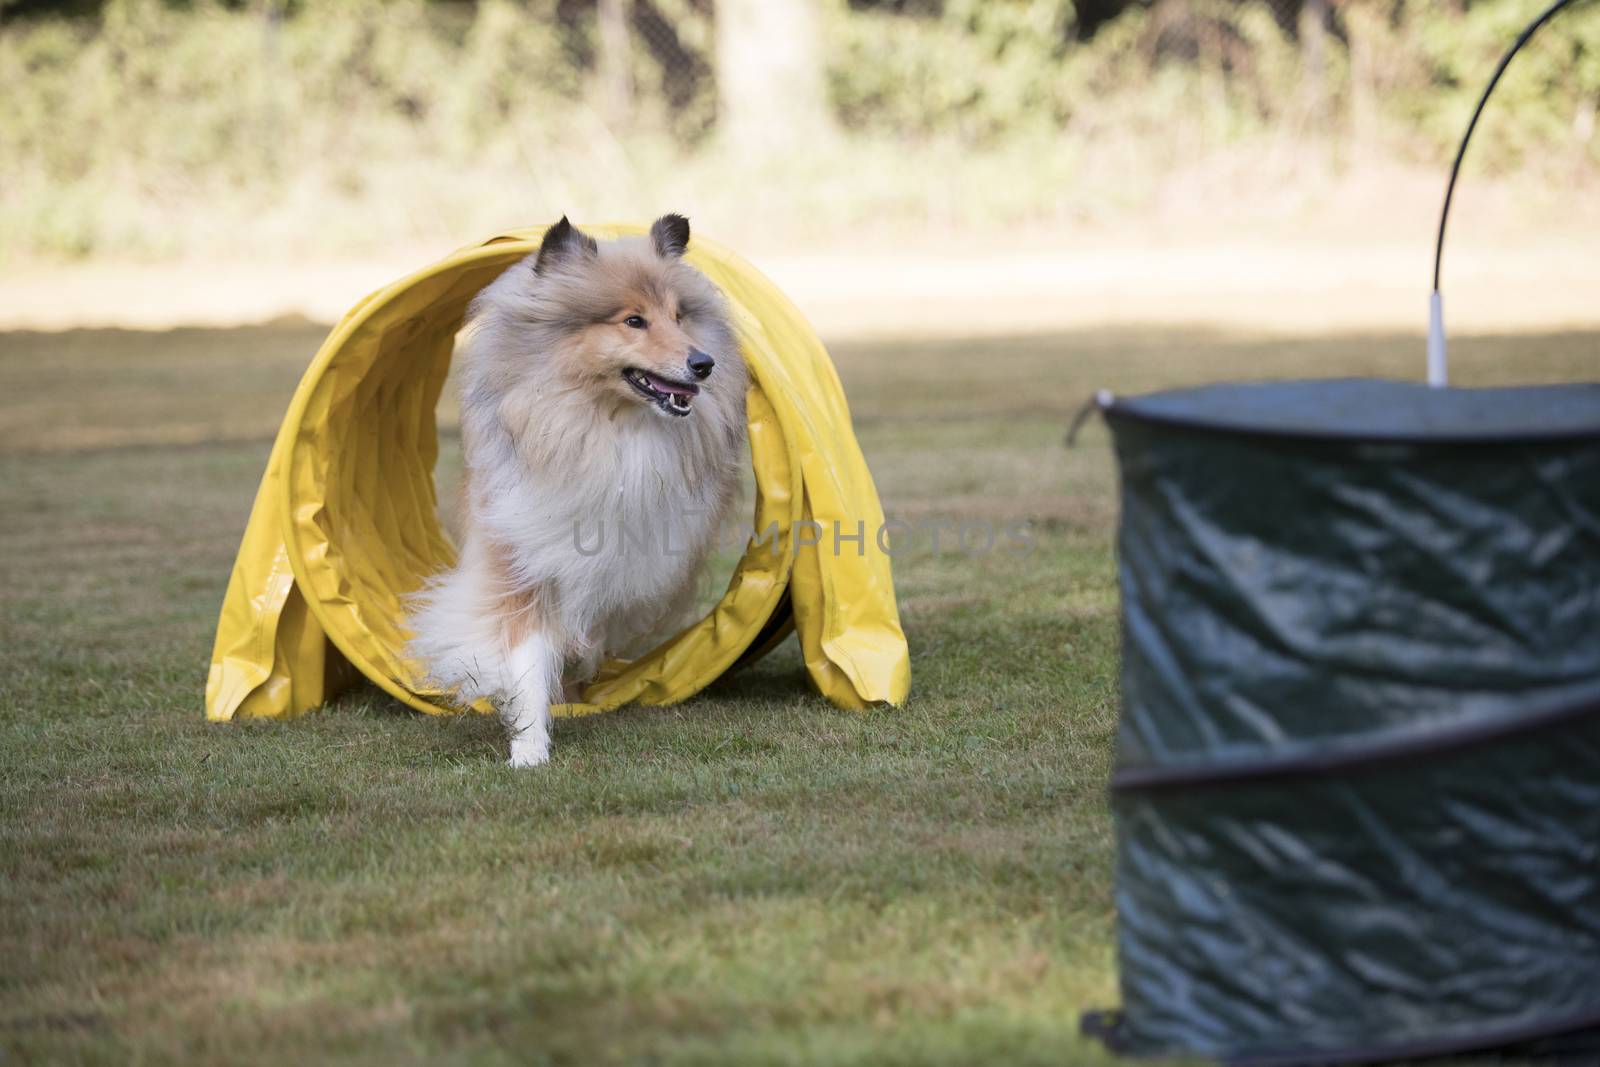 Scottish Collie running through agility tunnel, hoopers